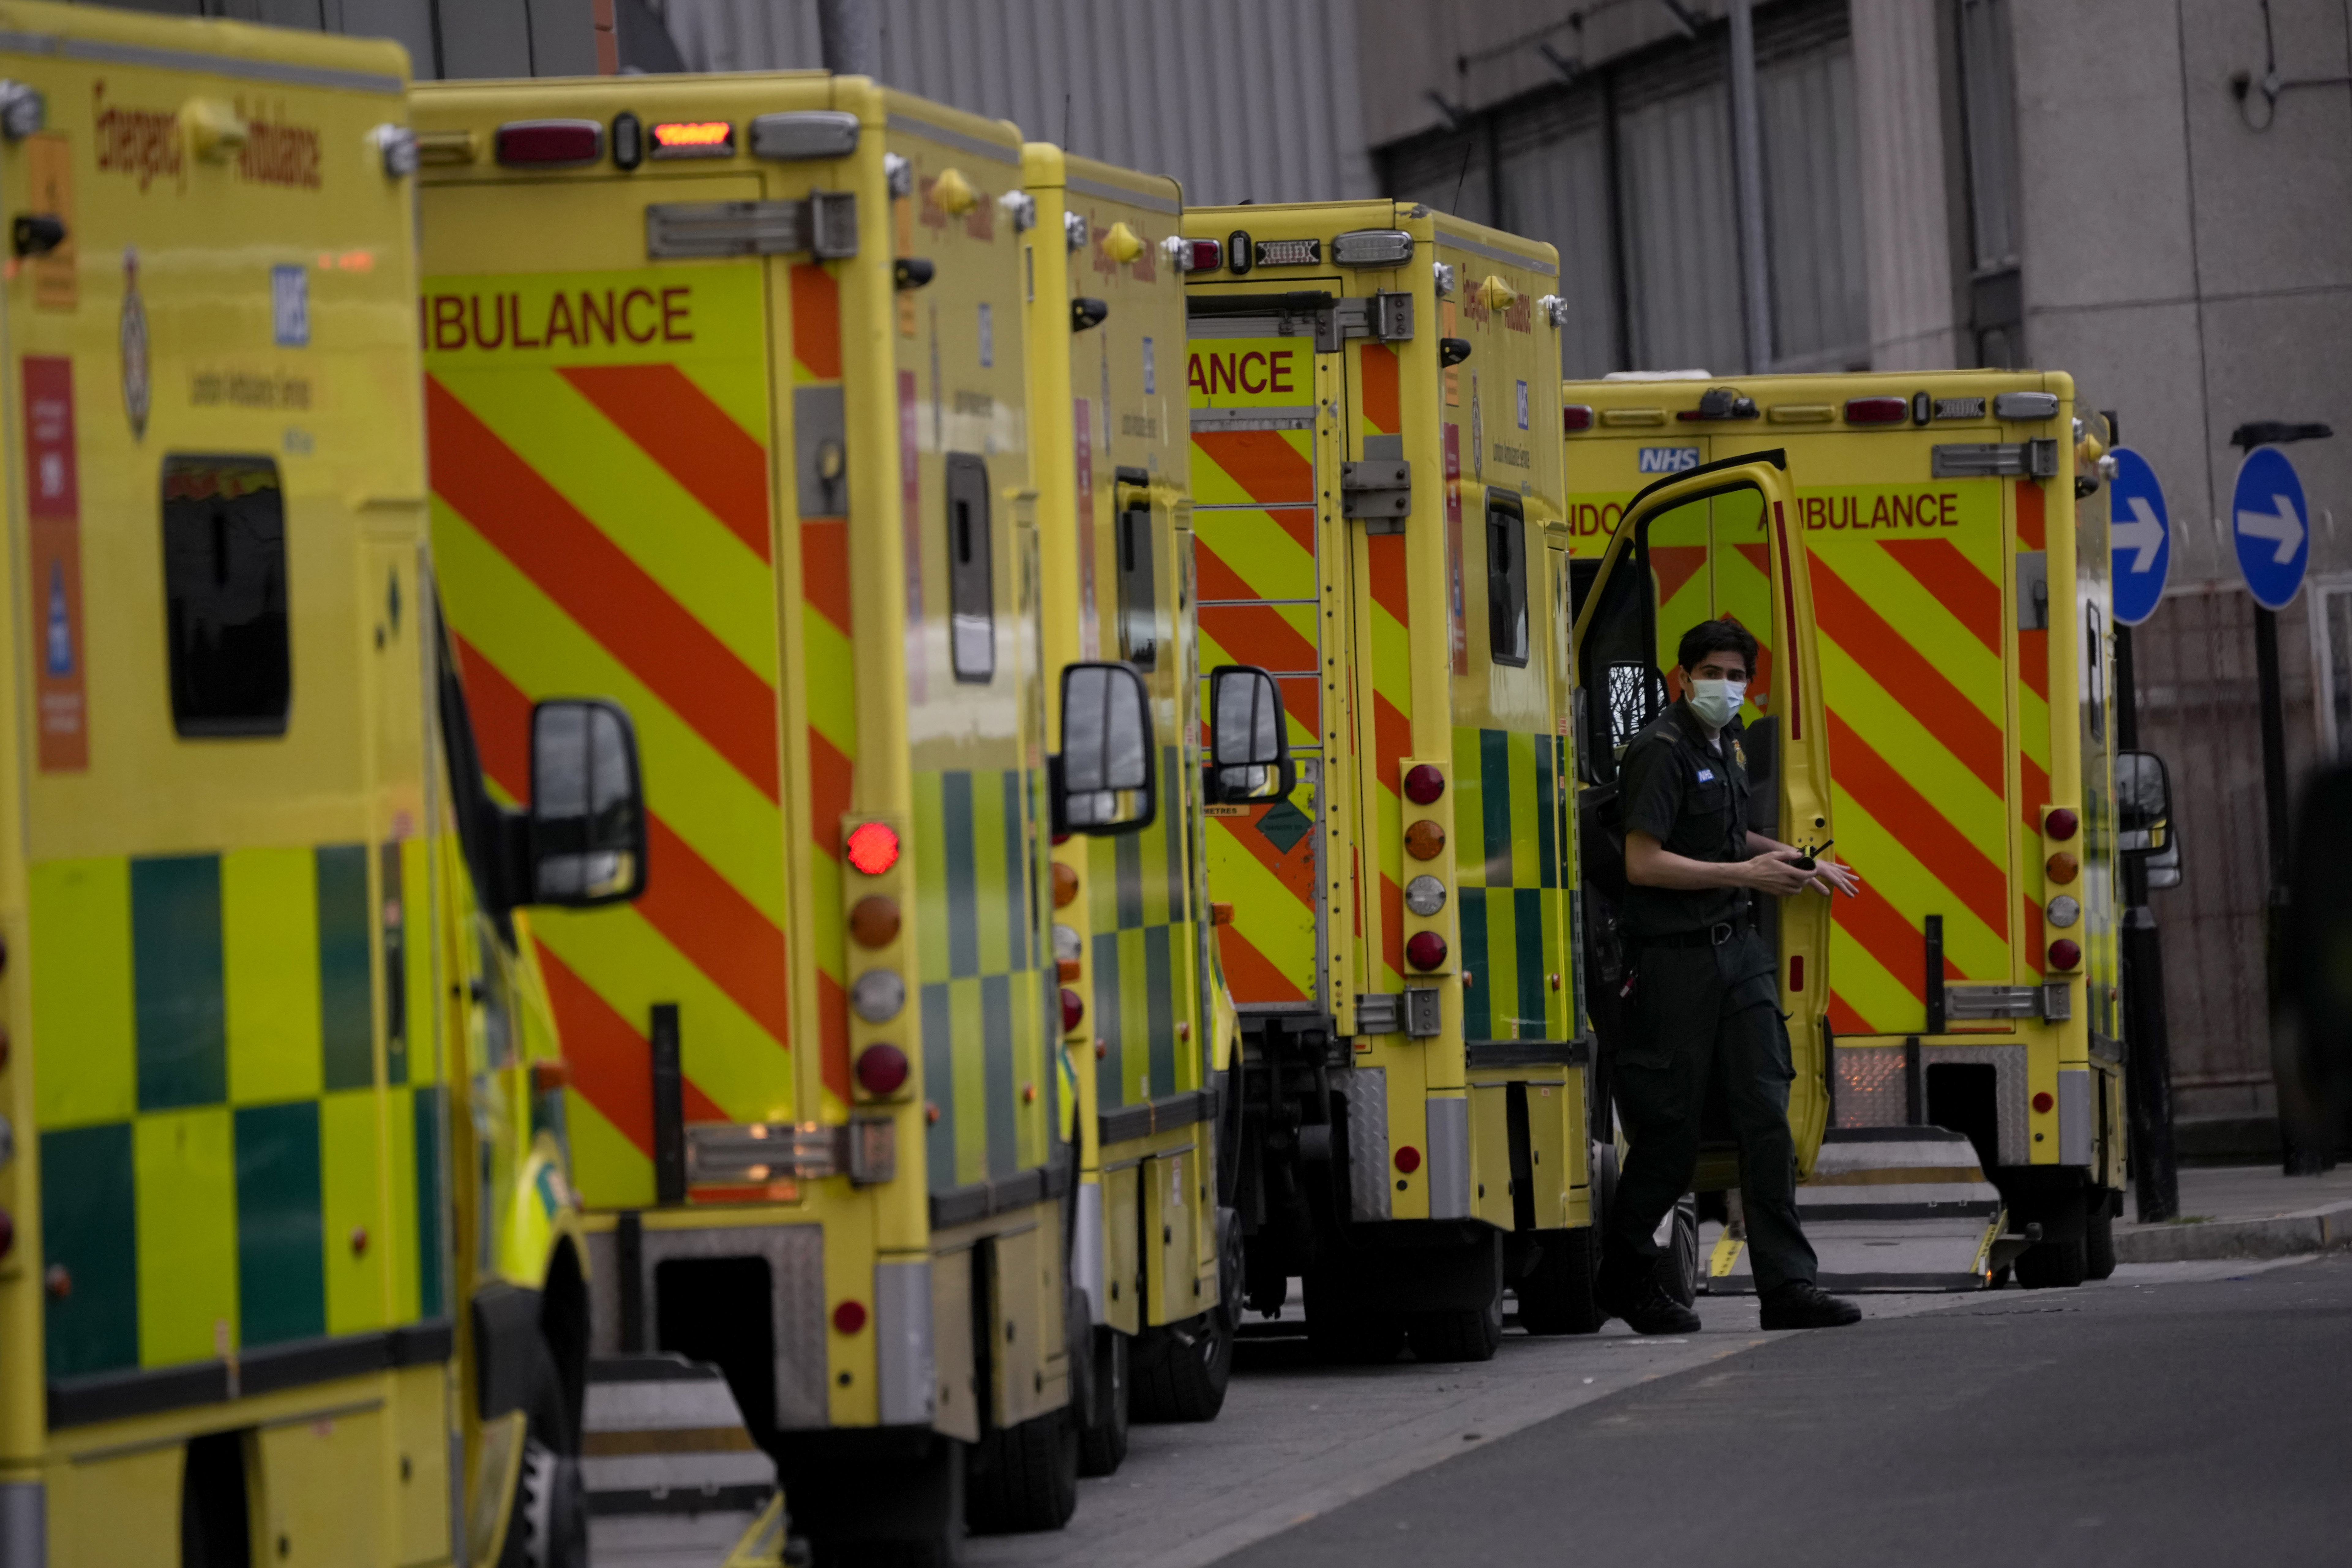 A paramedic gets out of an ambulance outside the Royal London Hospital in the Whitechapel area of east London, Thursday, January 6, 2022. A string of National Health Service local organizations have declared "critical incidents" in recent days amid staff shortages. 